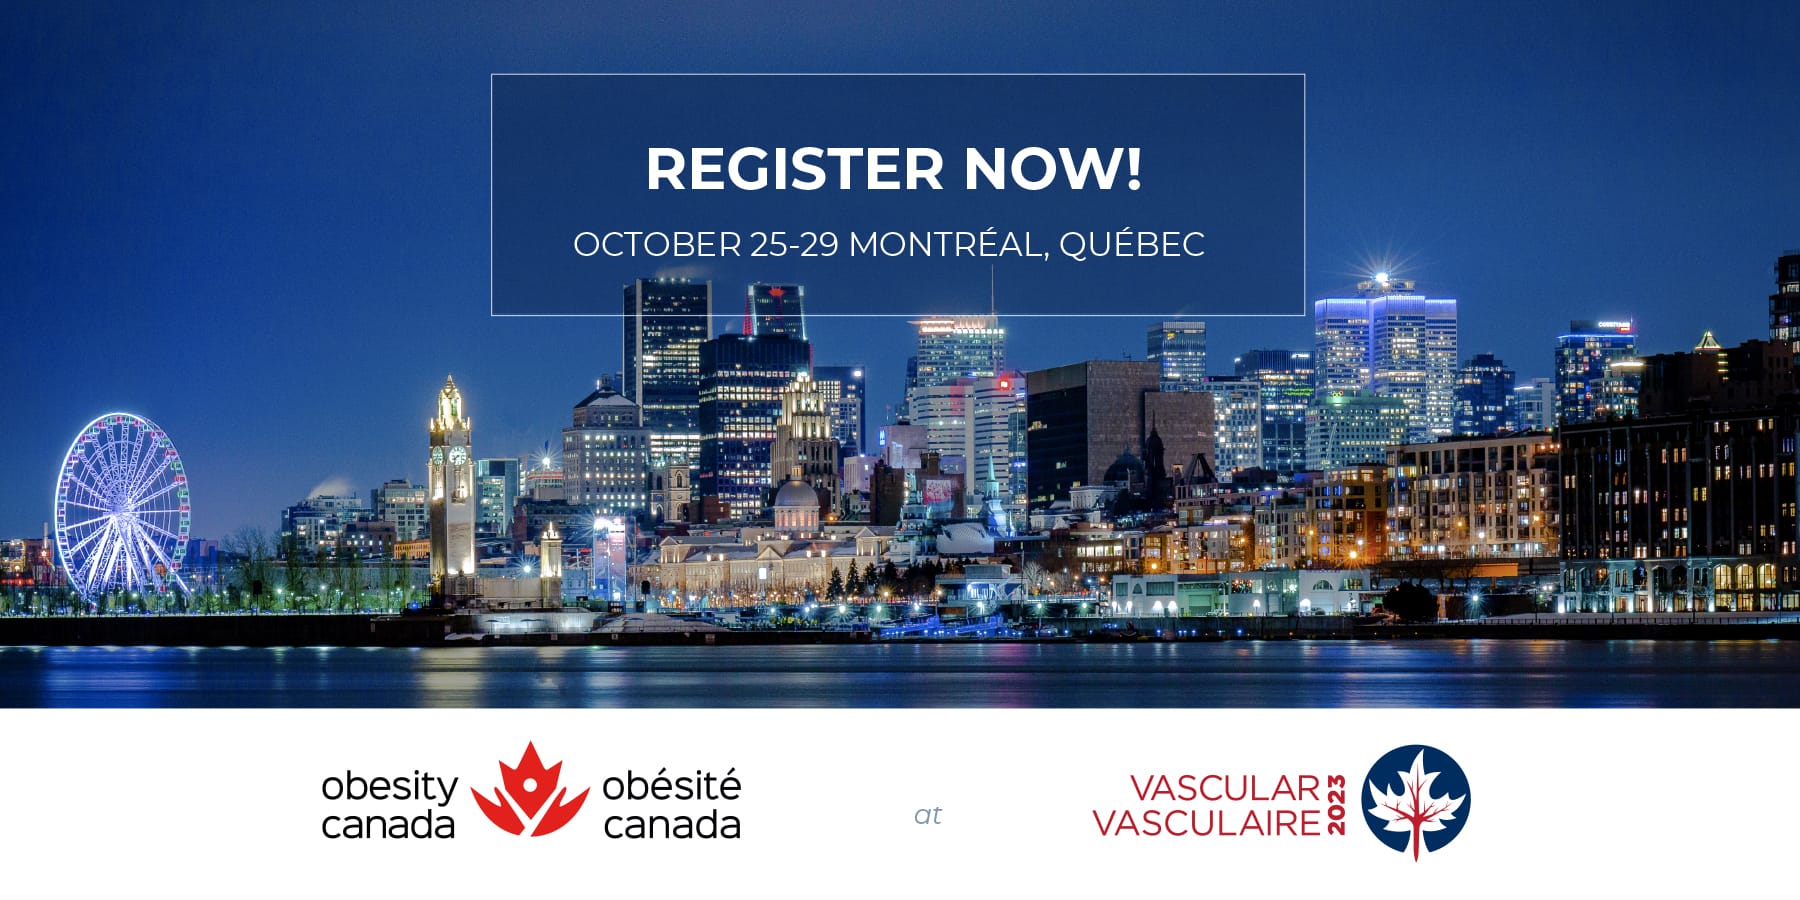 Promotional banner with "register now!" over a night skyline of montreal, quebec, featuring the date "october 25-29" and logos for obesity canada and vascular canada.